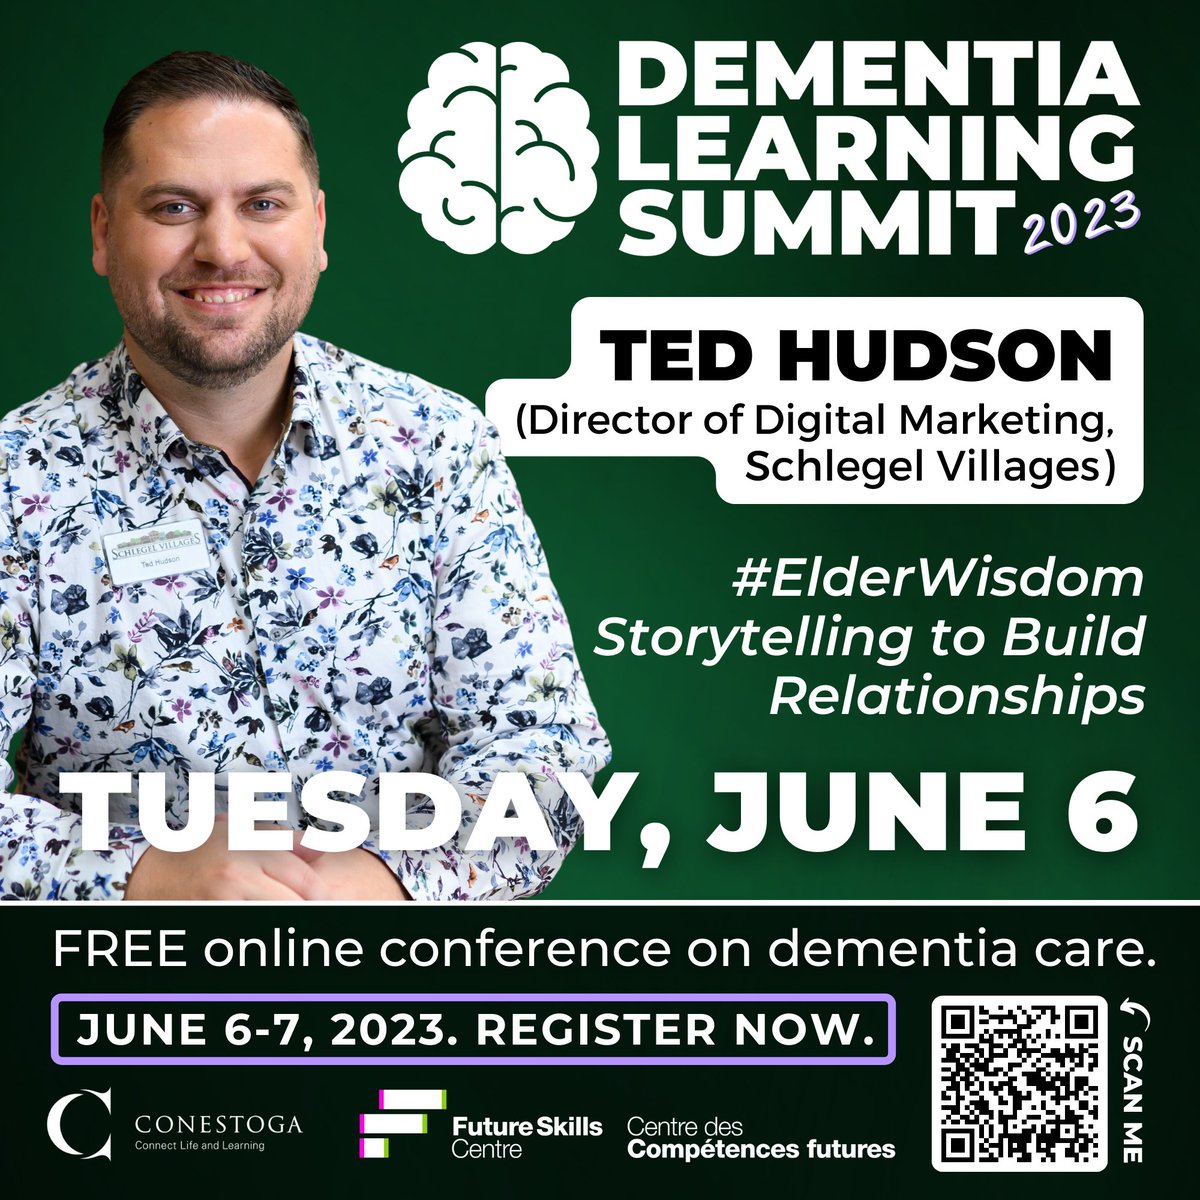 Tomorrow (June 6) at the #DementiaLS23, @SchlegelVillage’s  @TedHudson_ will share some #ElderWisdom about using storytelling to build relationships.

If you have not registered, now is the time.  tinyurl.com/mrcrmk6y
#ConestogaCRADLE @fsc_ccf_en @GreenBenchStory